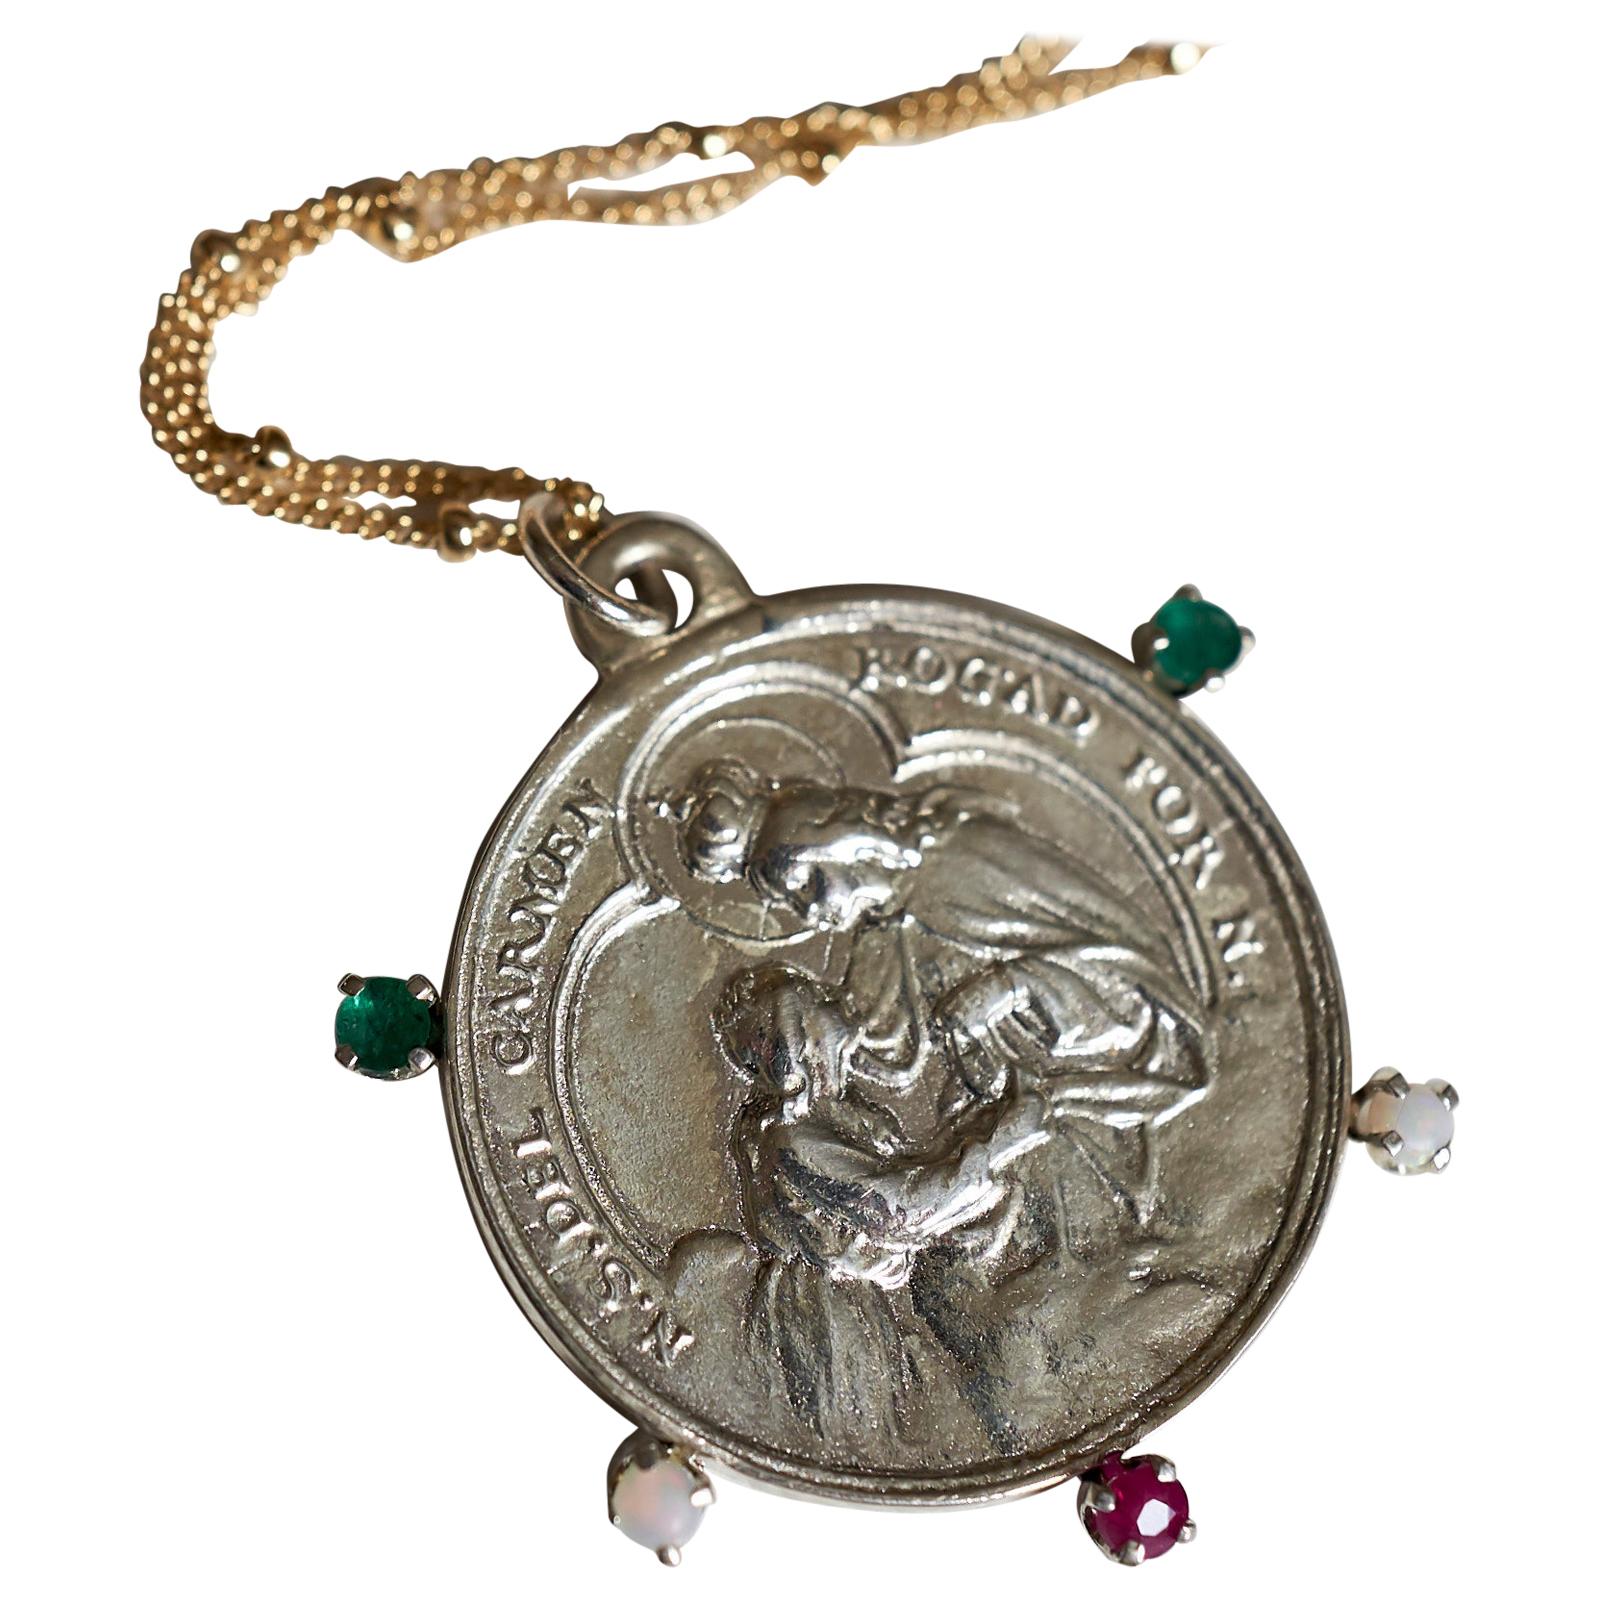 Emerald Ruby Opal Virgin Mary Medal Necklace Silver Pendant Gold filled Chain J Dauphin

Symbols or medals can become a powerful tool in our arsenal for the spiritual. 
Since ancient times spiritual pendants, religious medals has been used to